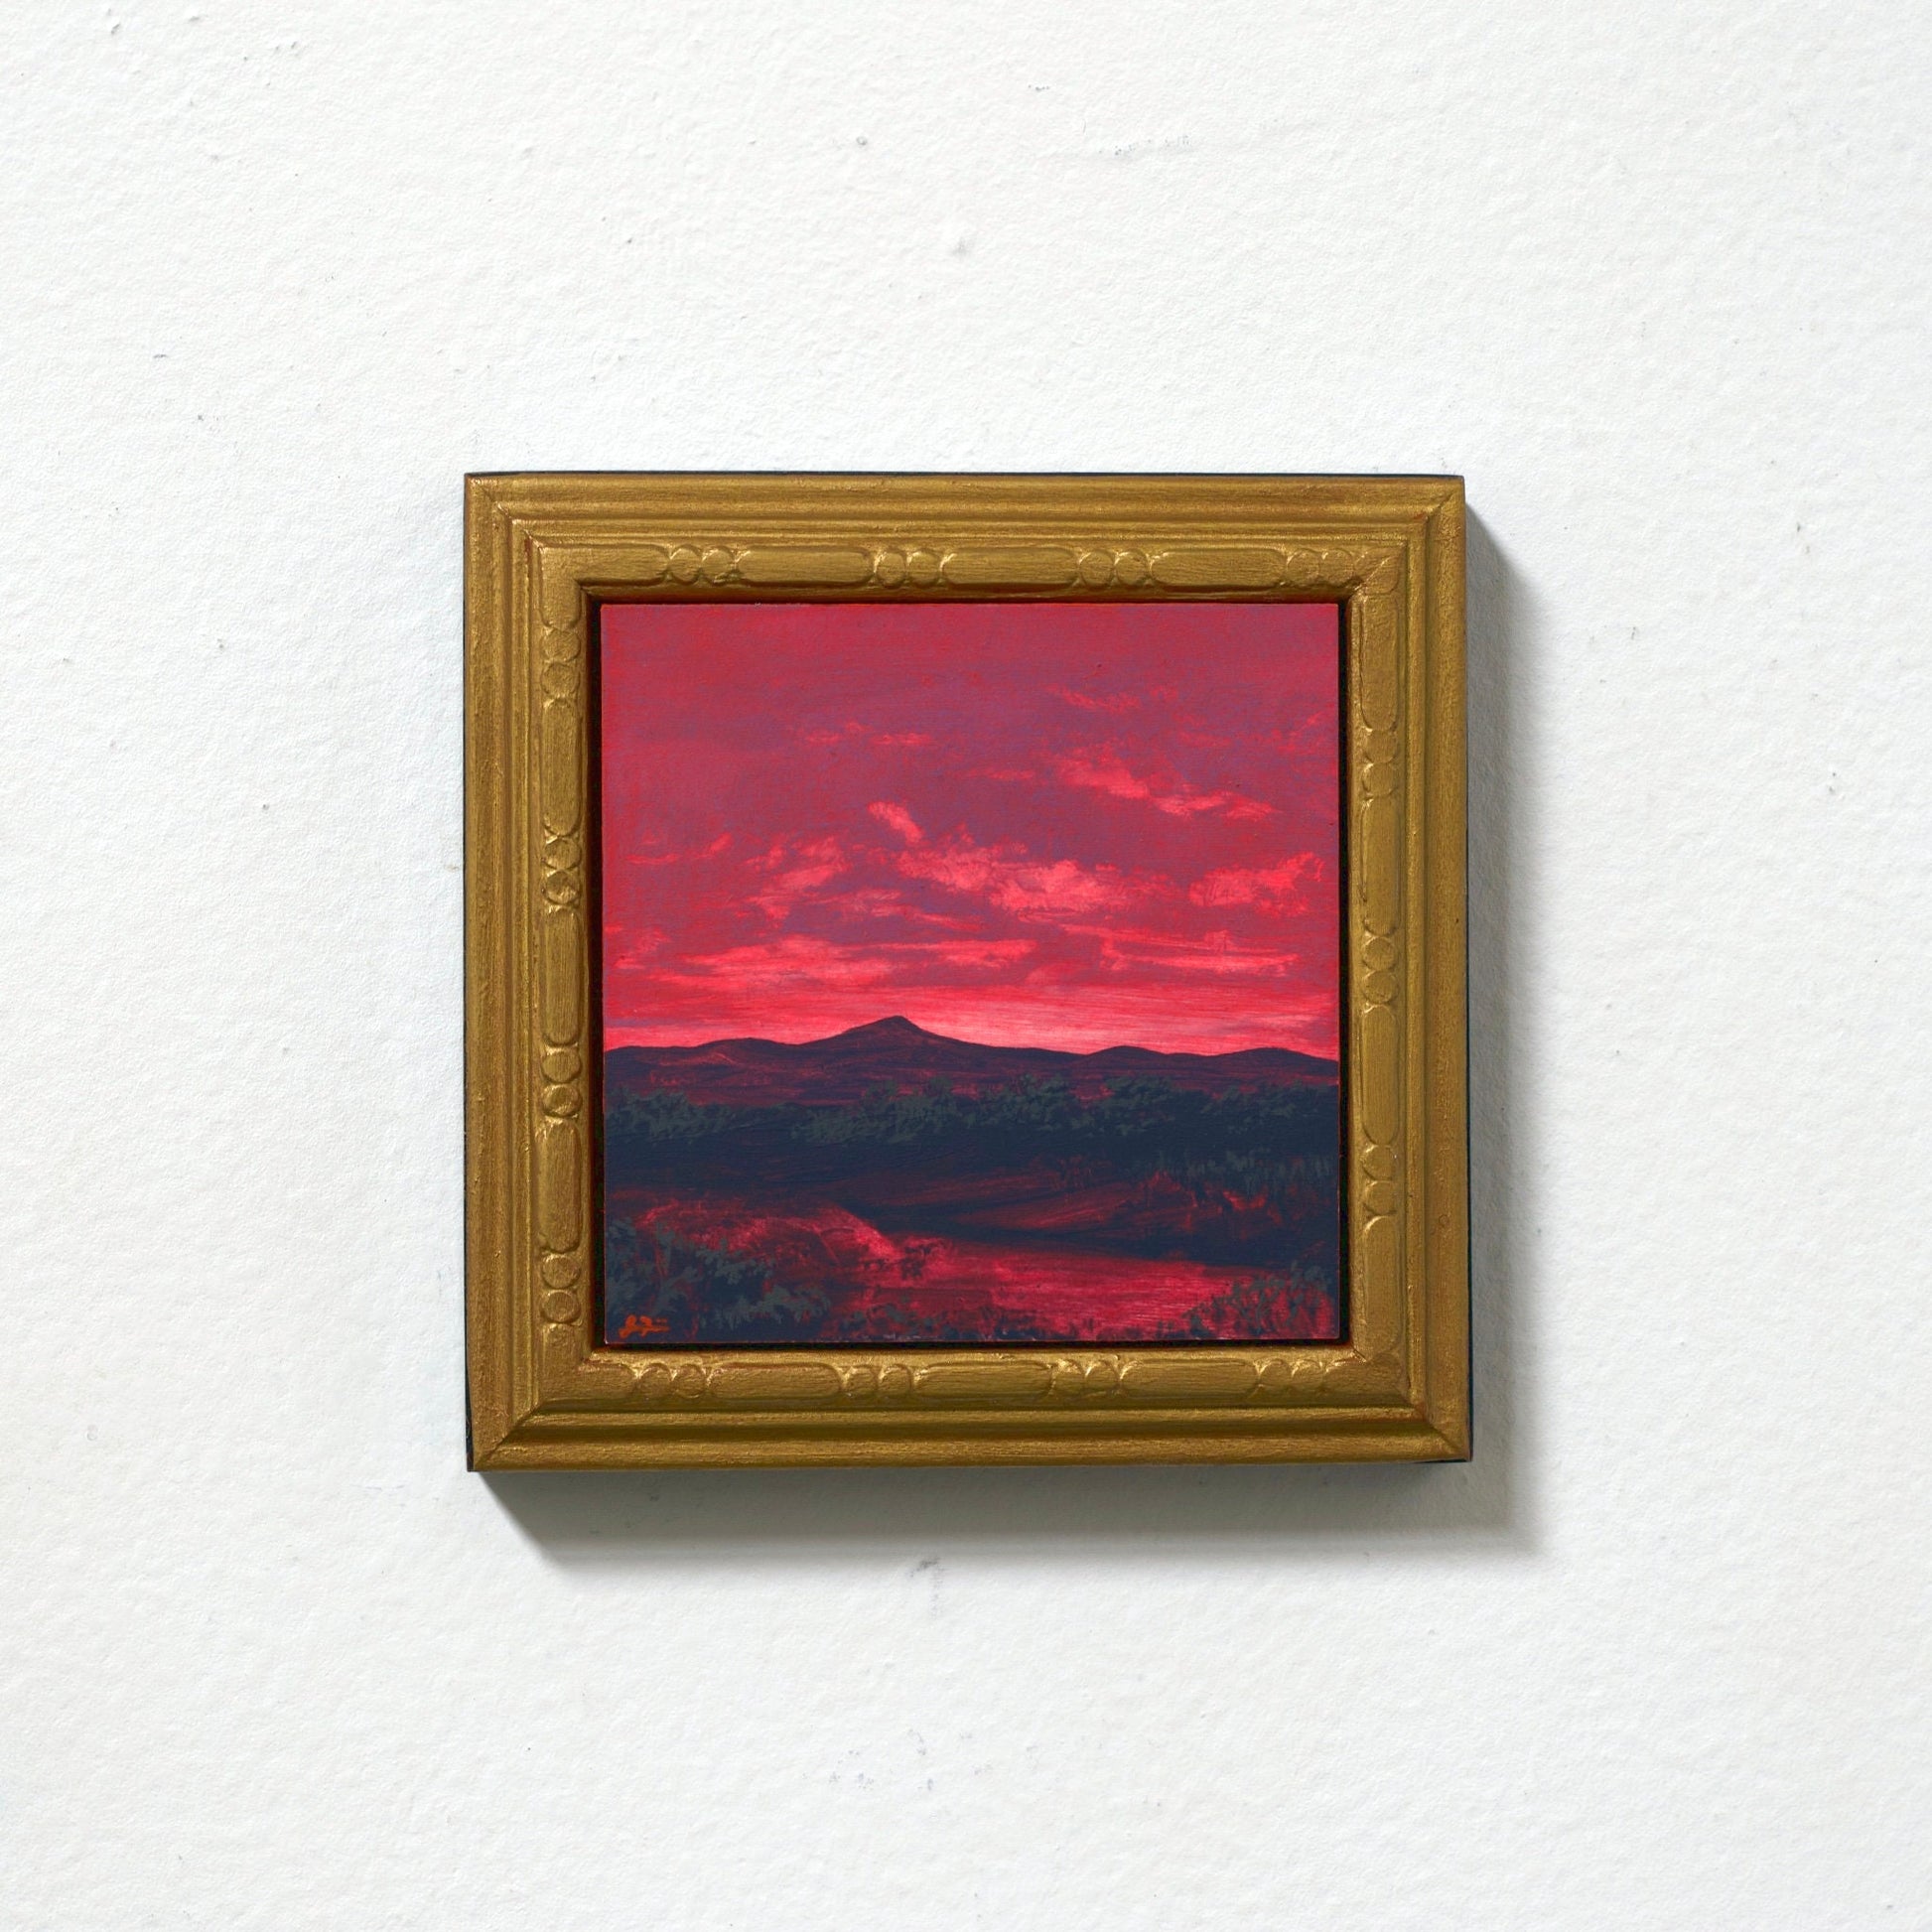 Agua Fria Miniature Series 2, No.5 - Original Southwest Landscape Oil Painting - 4 x 4 inches in handmade wooden frame